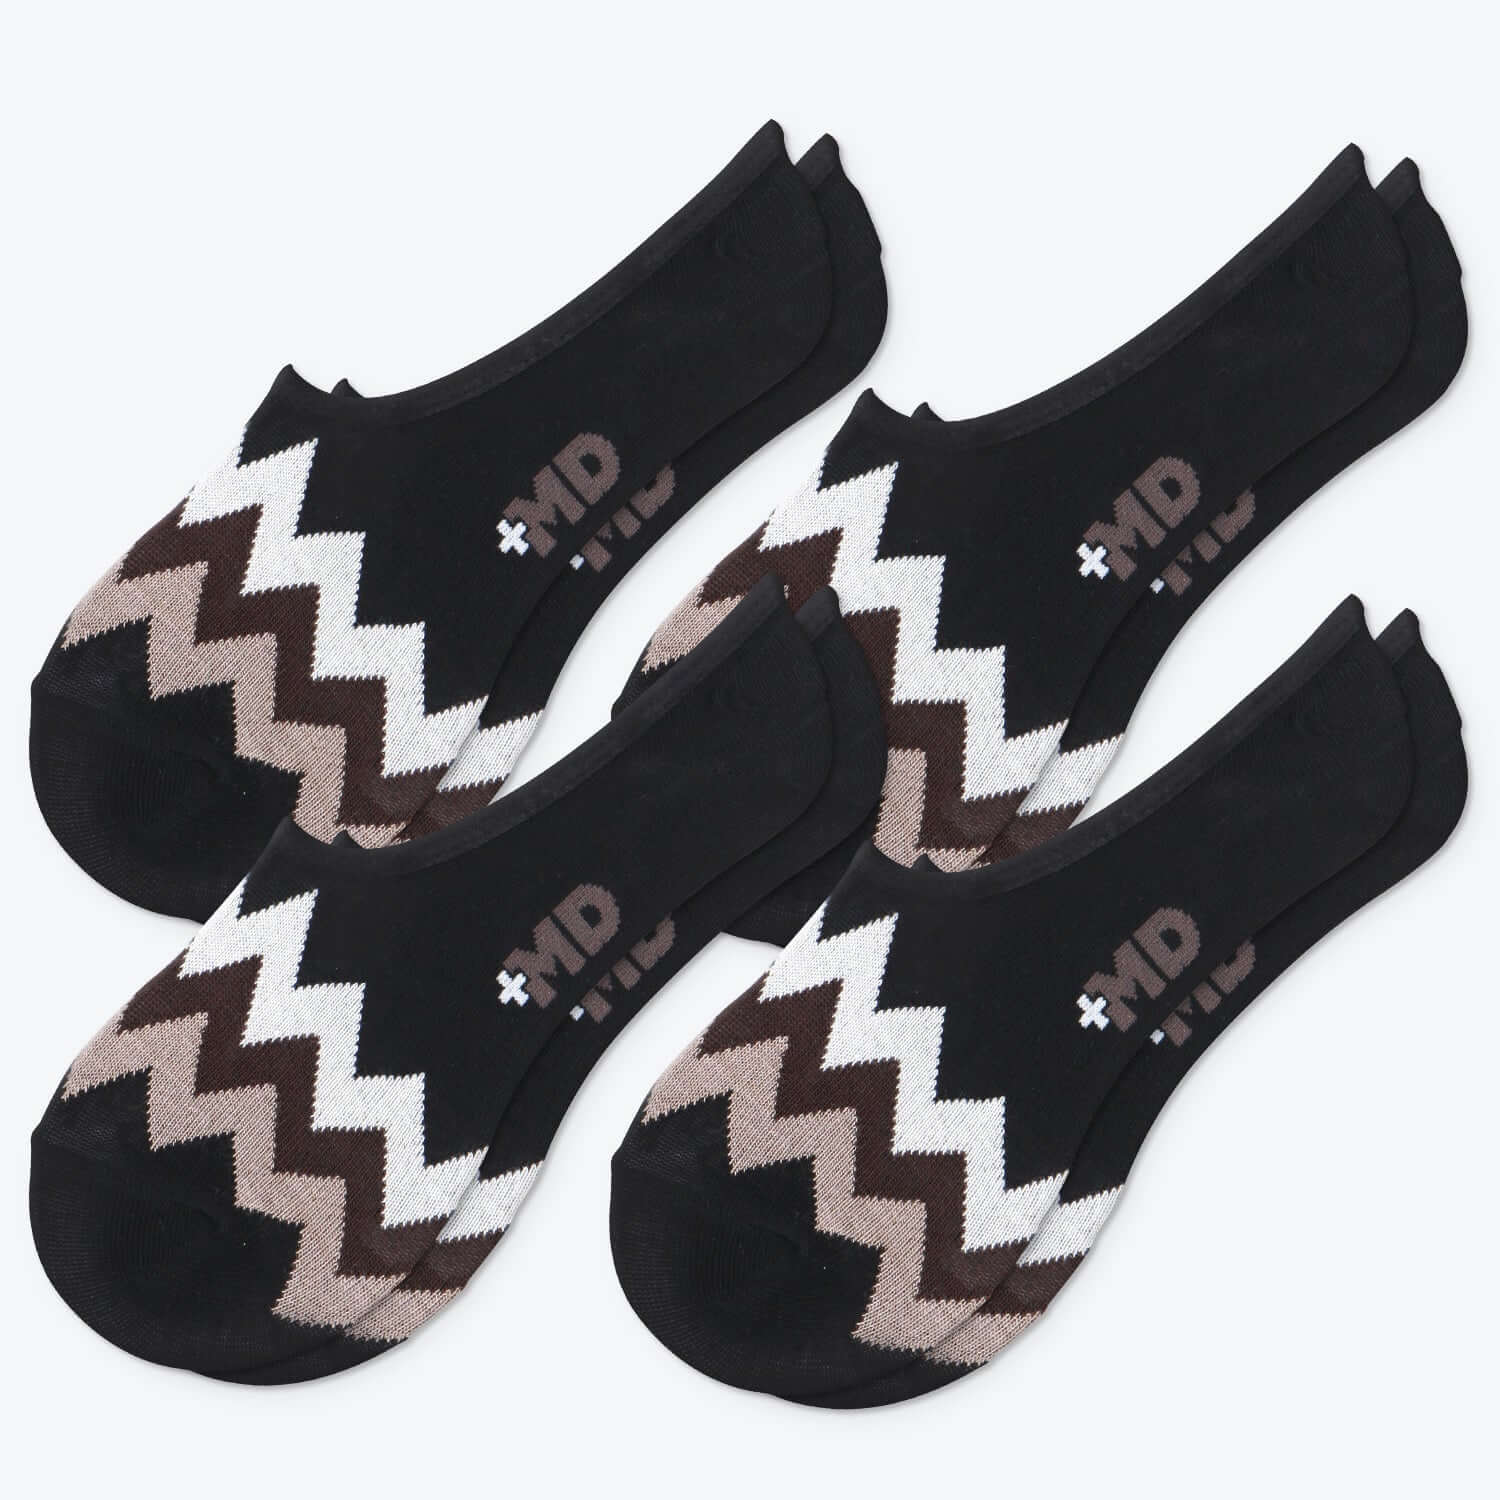 Indian Style Bamboo Liner Socks, Non Slip, 4 Pairs - md-diab